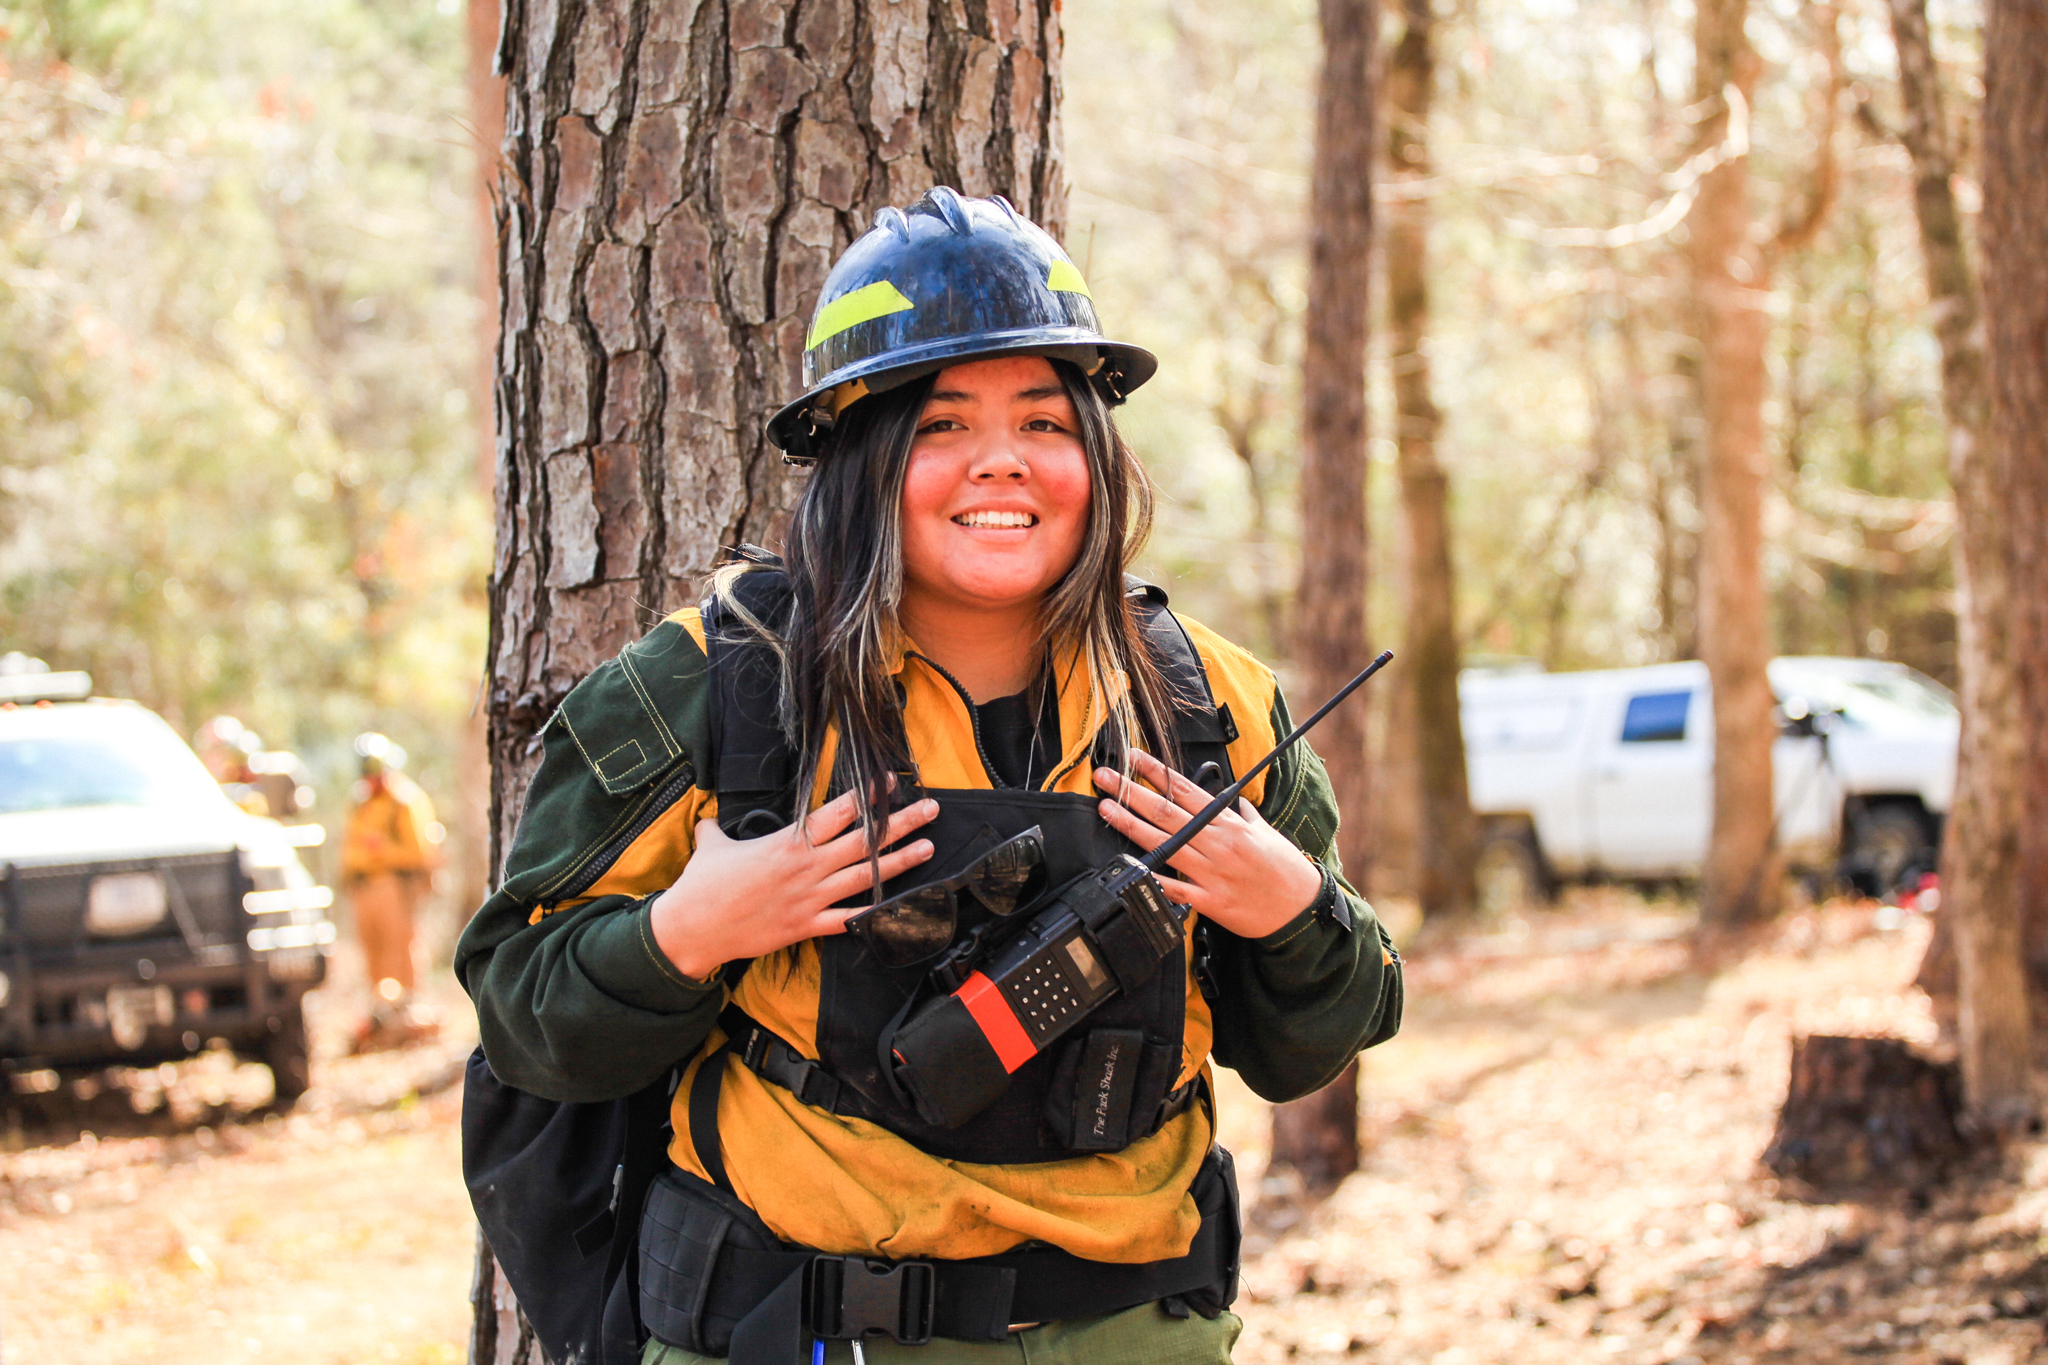 Charity Battise stands in her fire gear before a burn.